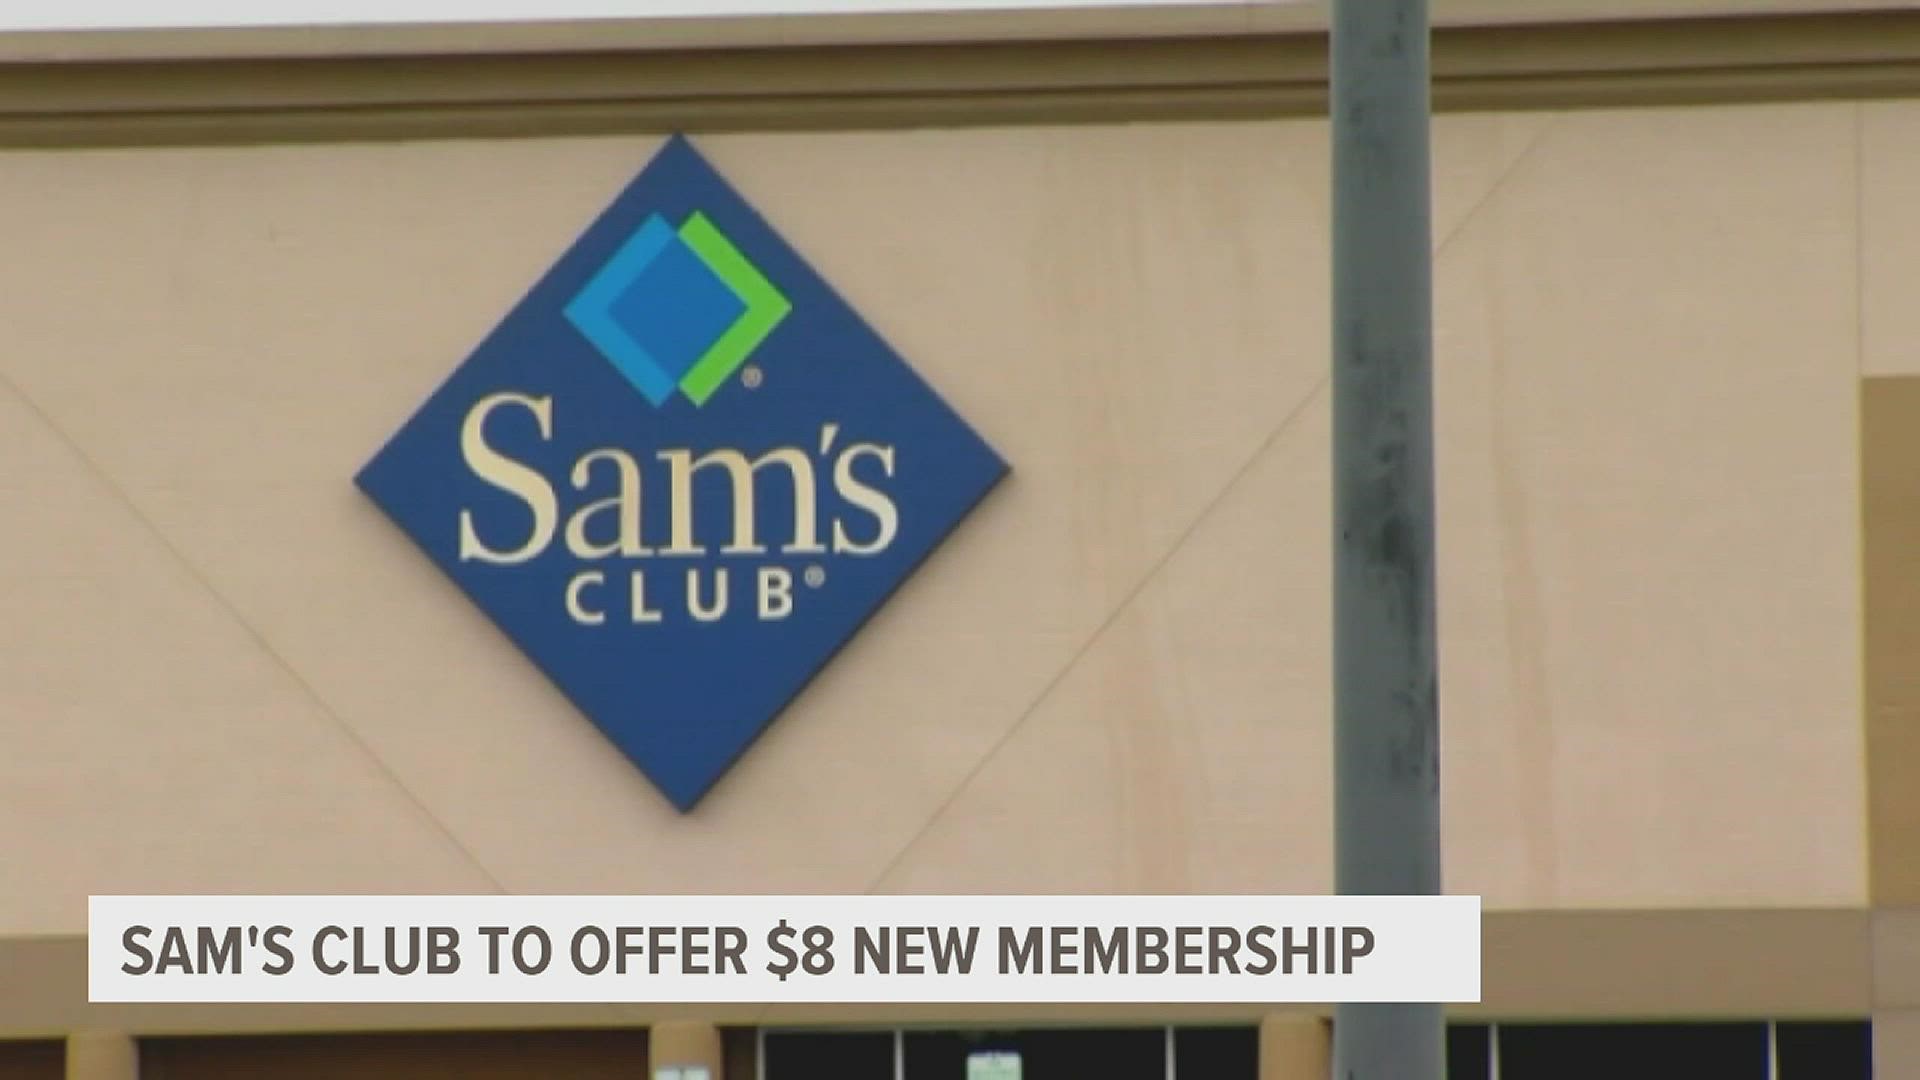 Sam's Club offers discount on memberships